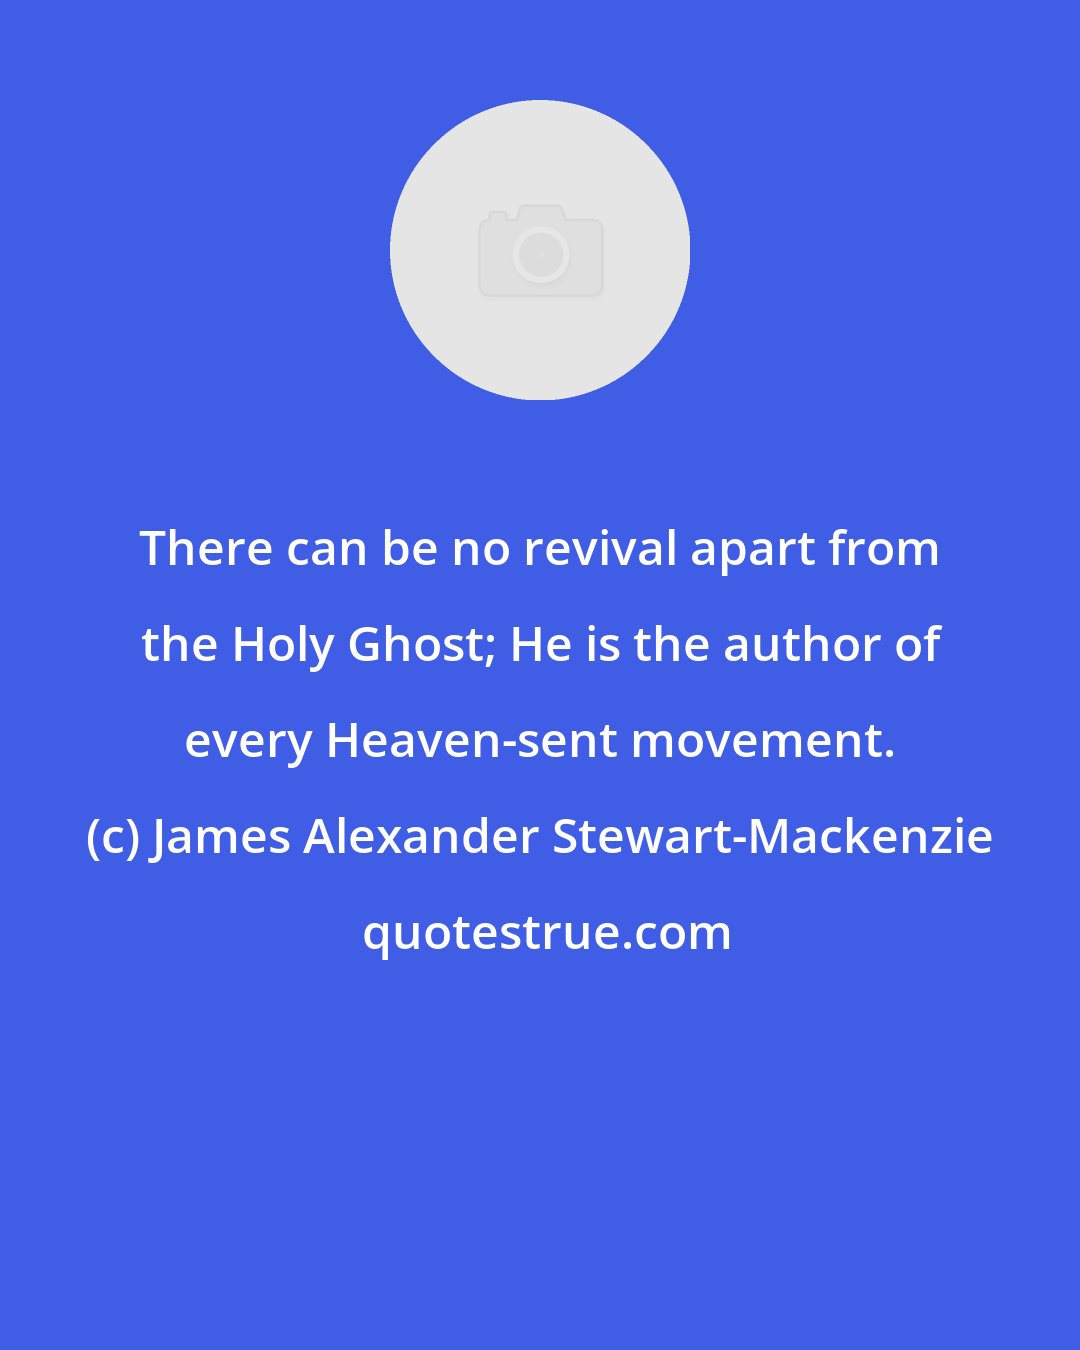 James Alexander Stewart-Mackenzie: There can be no revival apart from the Holy Ghost; He is the author of every Heaven-sent movement.